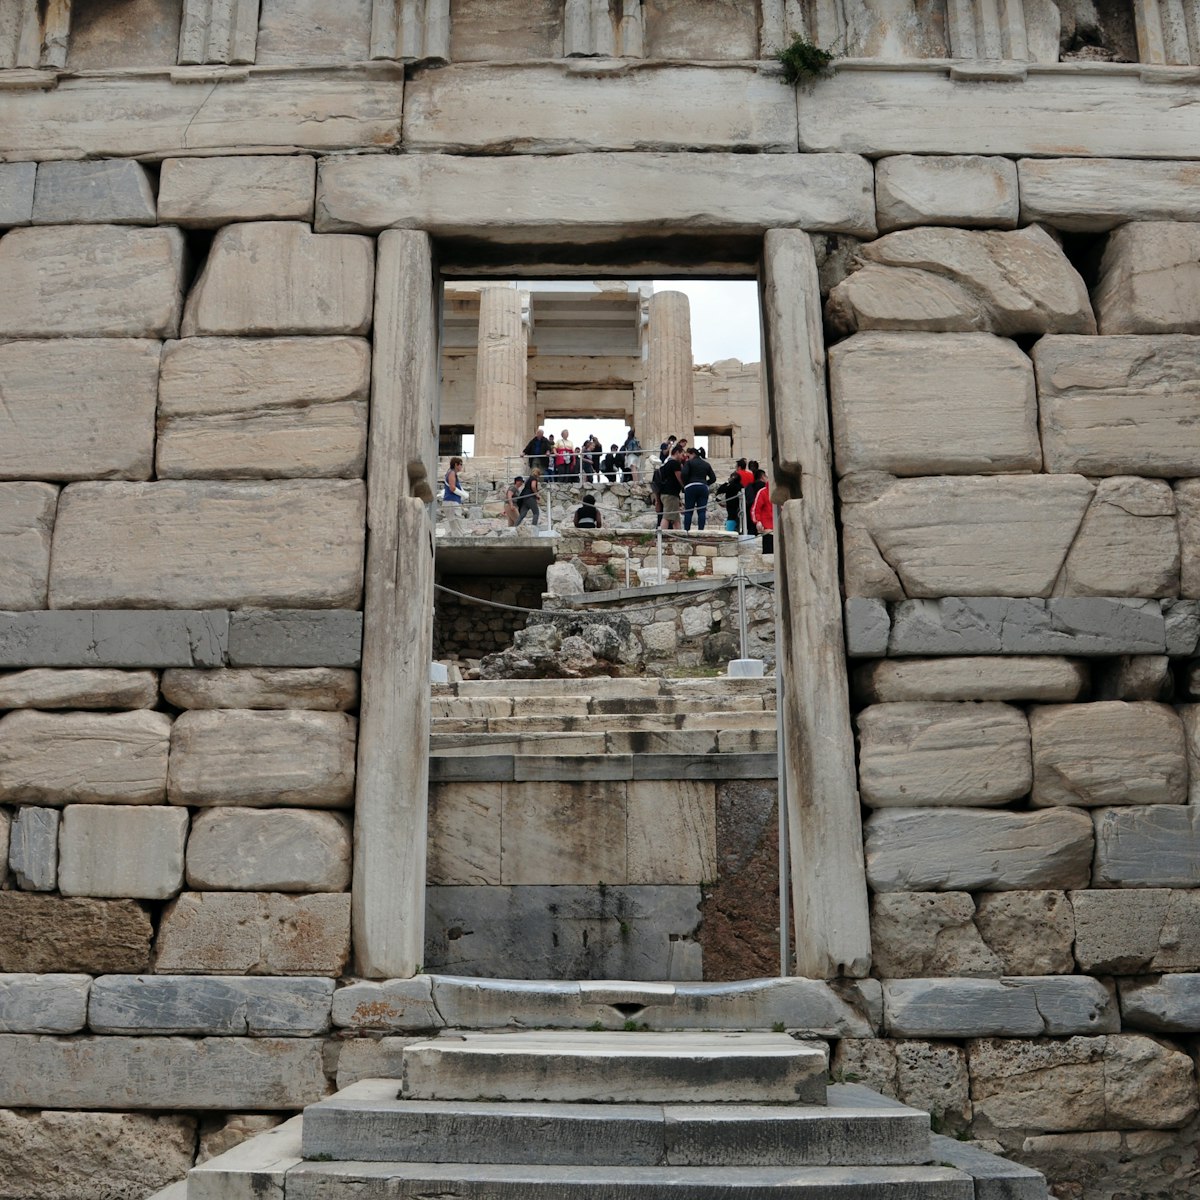 ATHENS, GREECE - MAY 6, 2014: Visitors at the Propylaia and the Beule Gate west entrance to the Acropolis of Athens, Greece.; Shutterstock ID 206520655; your: Erin Lenczycki; gl: 65050; netsuite: Digital; full: POI
206520655